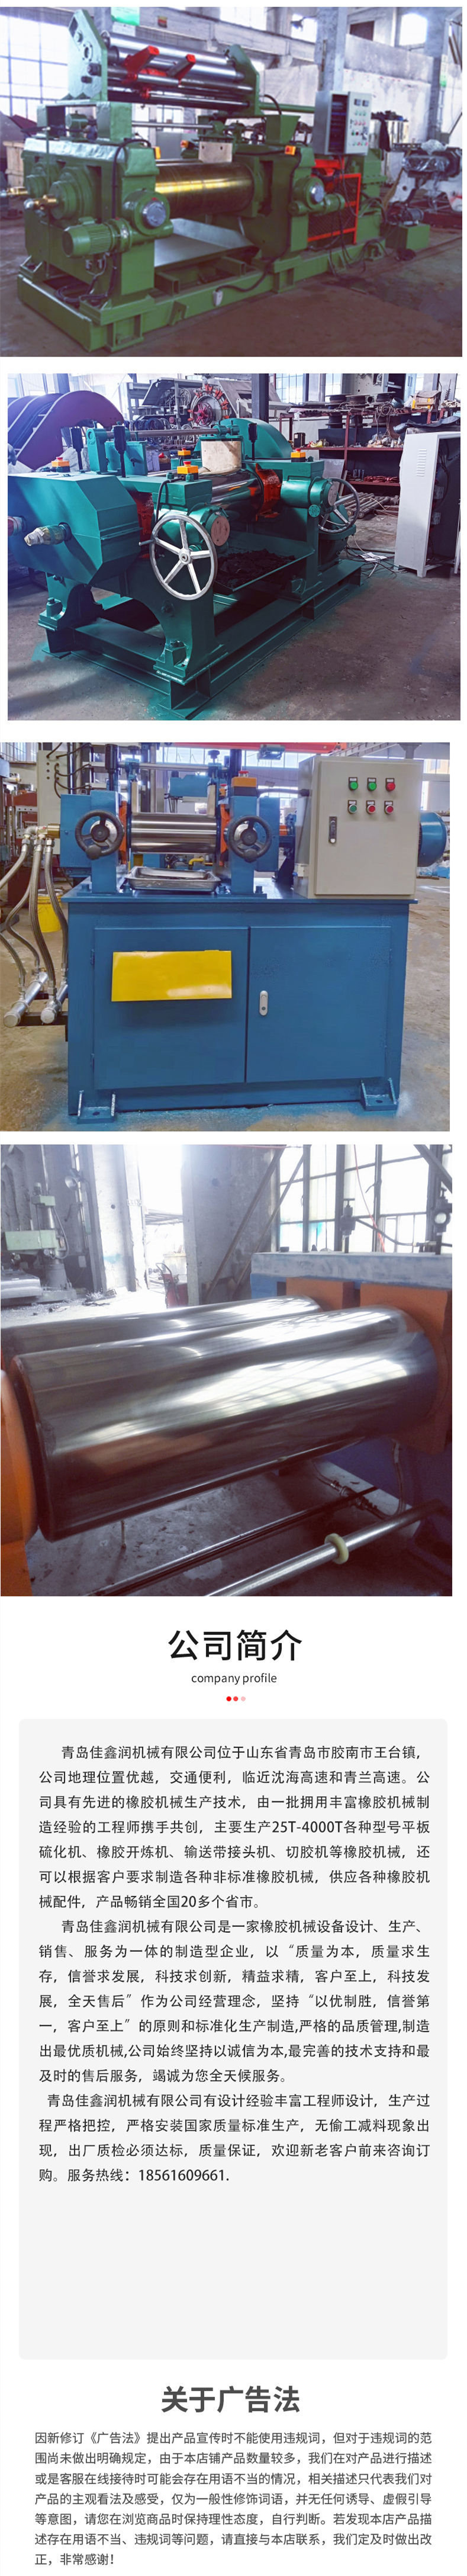 Jiaxin Run 18 inch nylon tile type rubber mixer -450 double roller large gear type open mill - customized hard tooth surface type